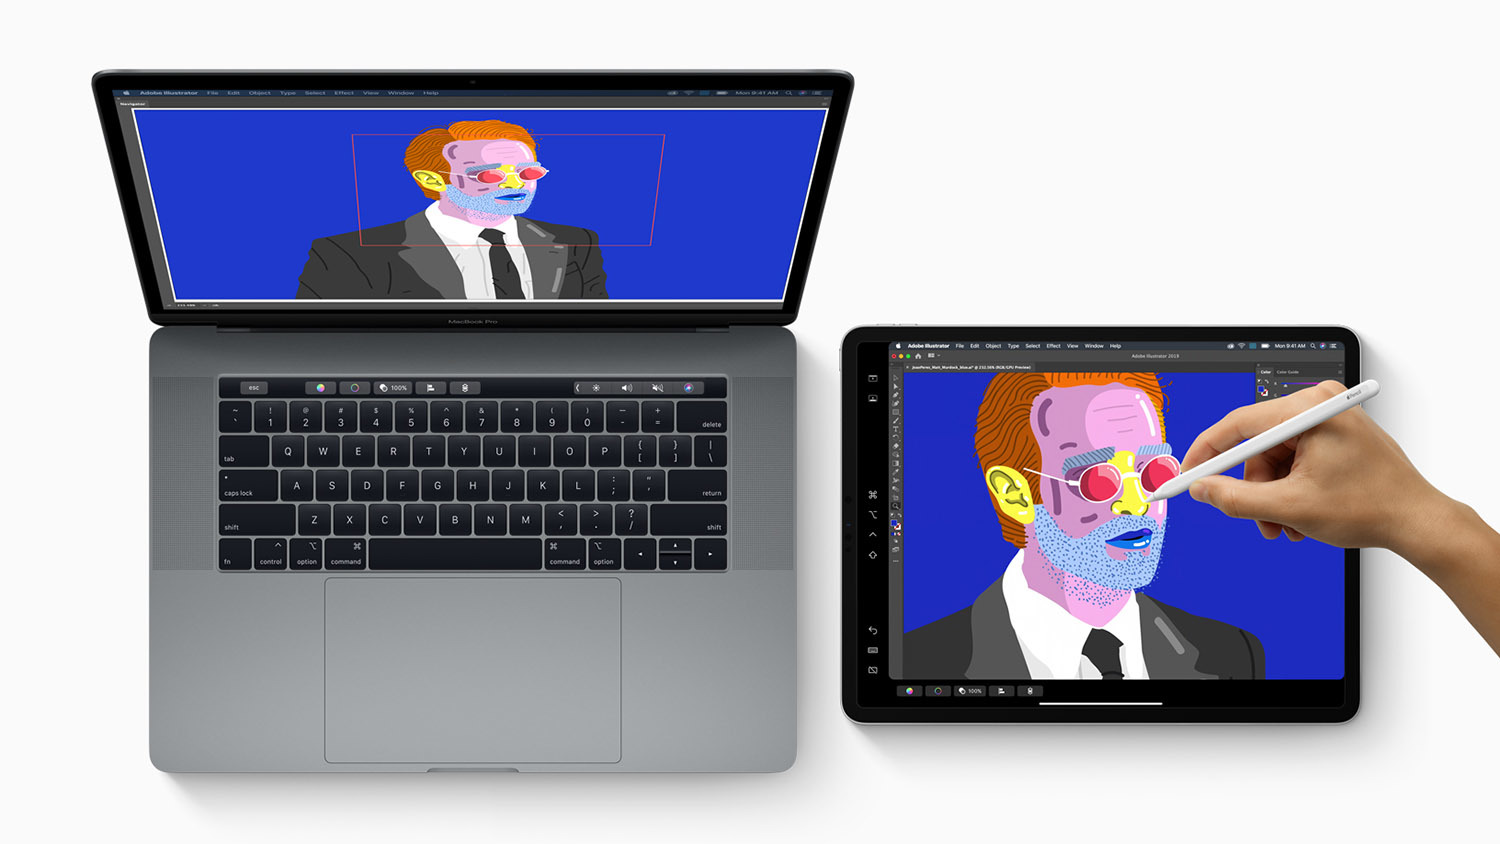 Apple-previews-macOS-Catalina-sidecar-with-iPad-Pro-06032019.jpg